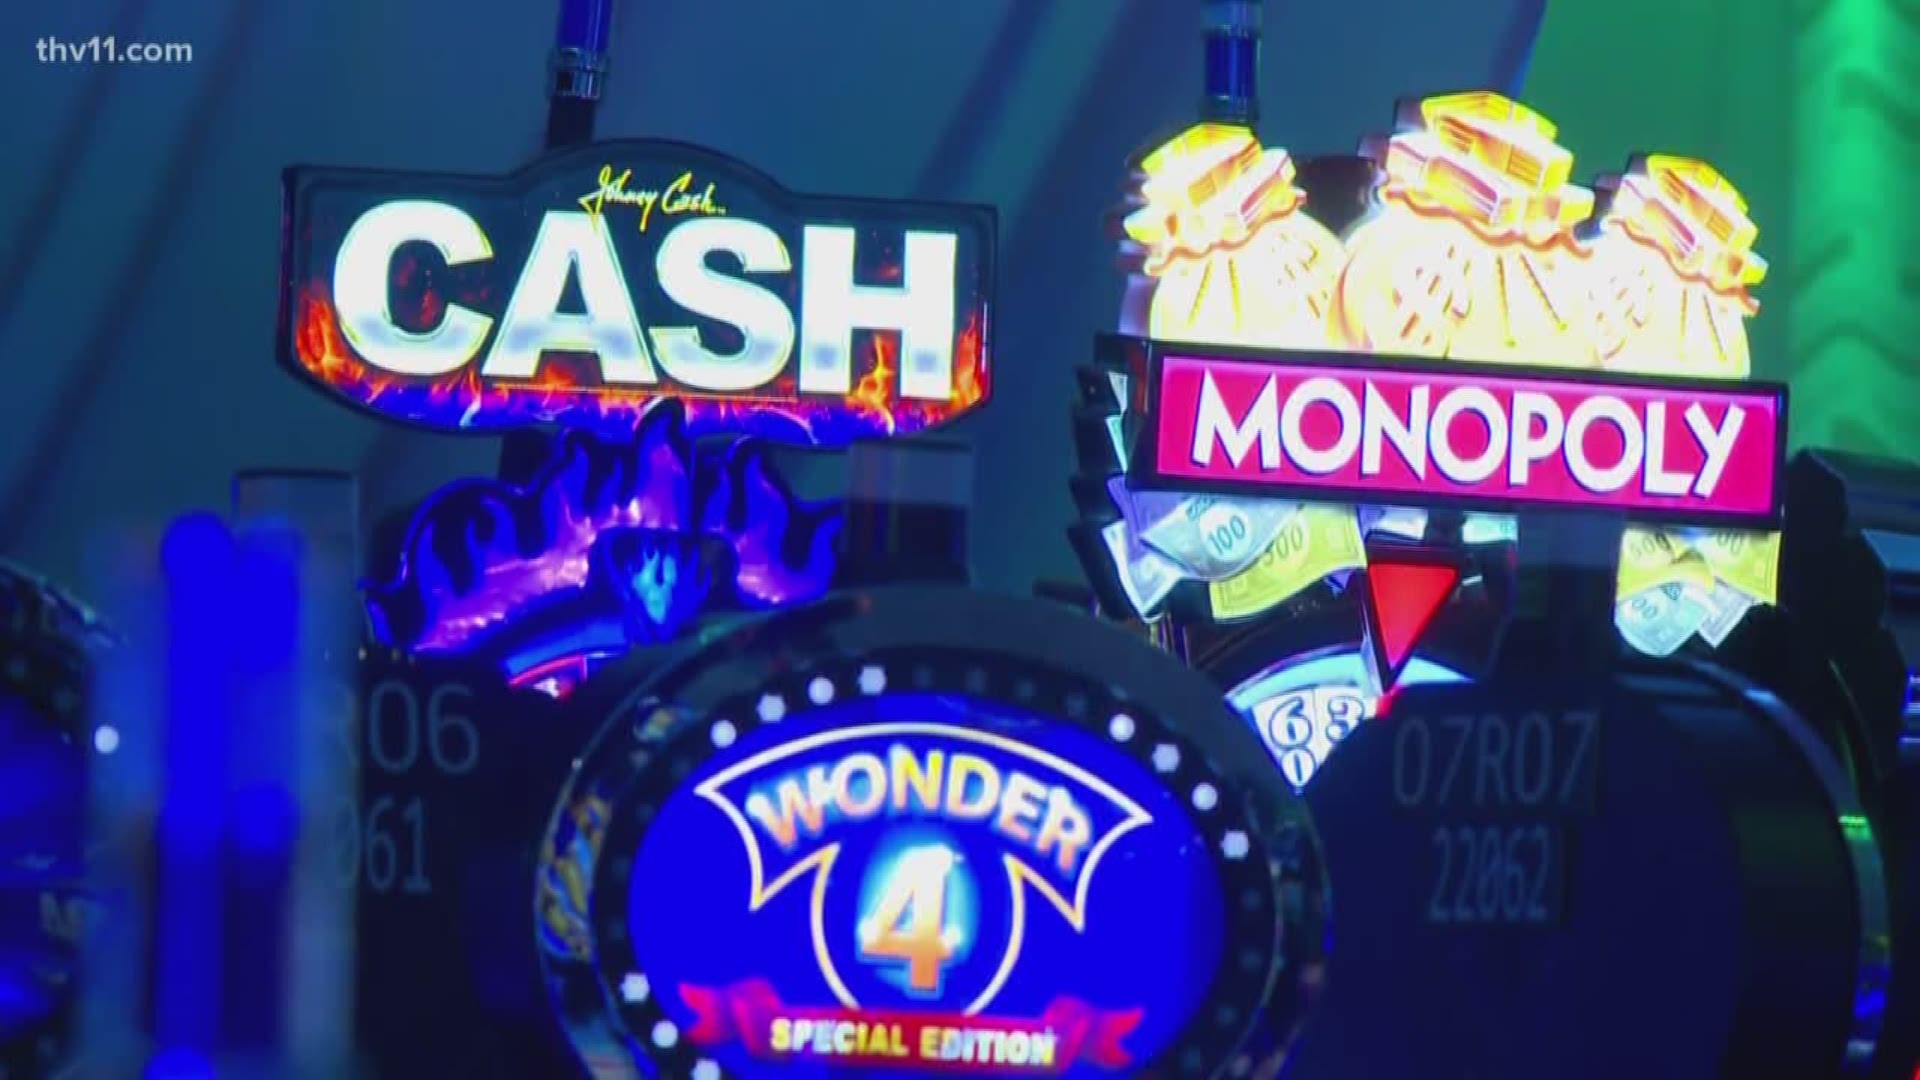 On Thursday, the Racing Commission will vote to adopt, modify or reject the proposed rules for how casinos will operate.